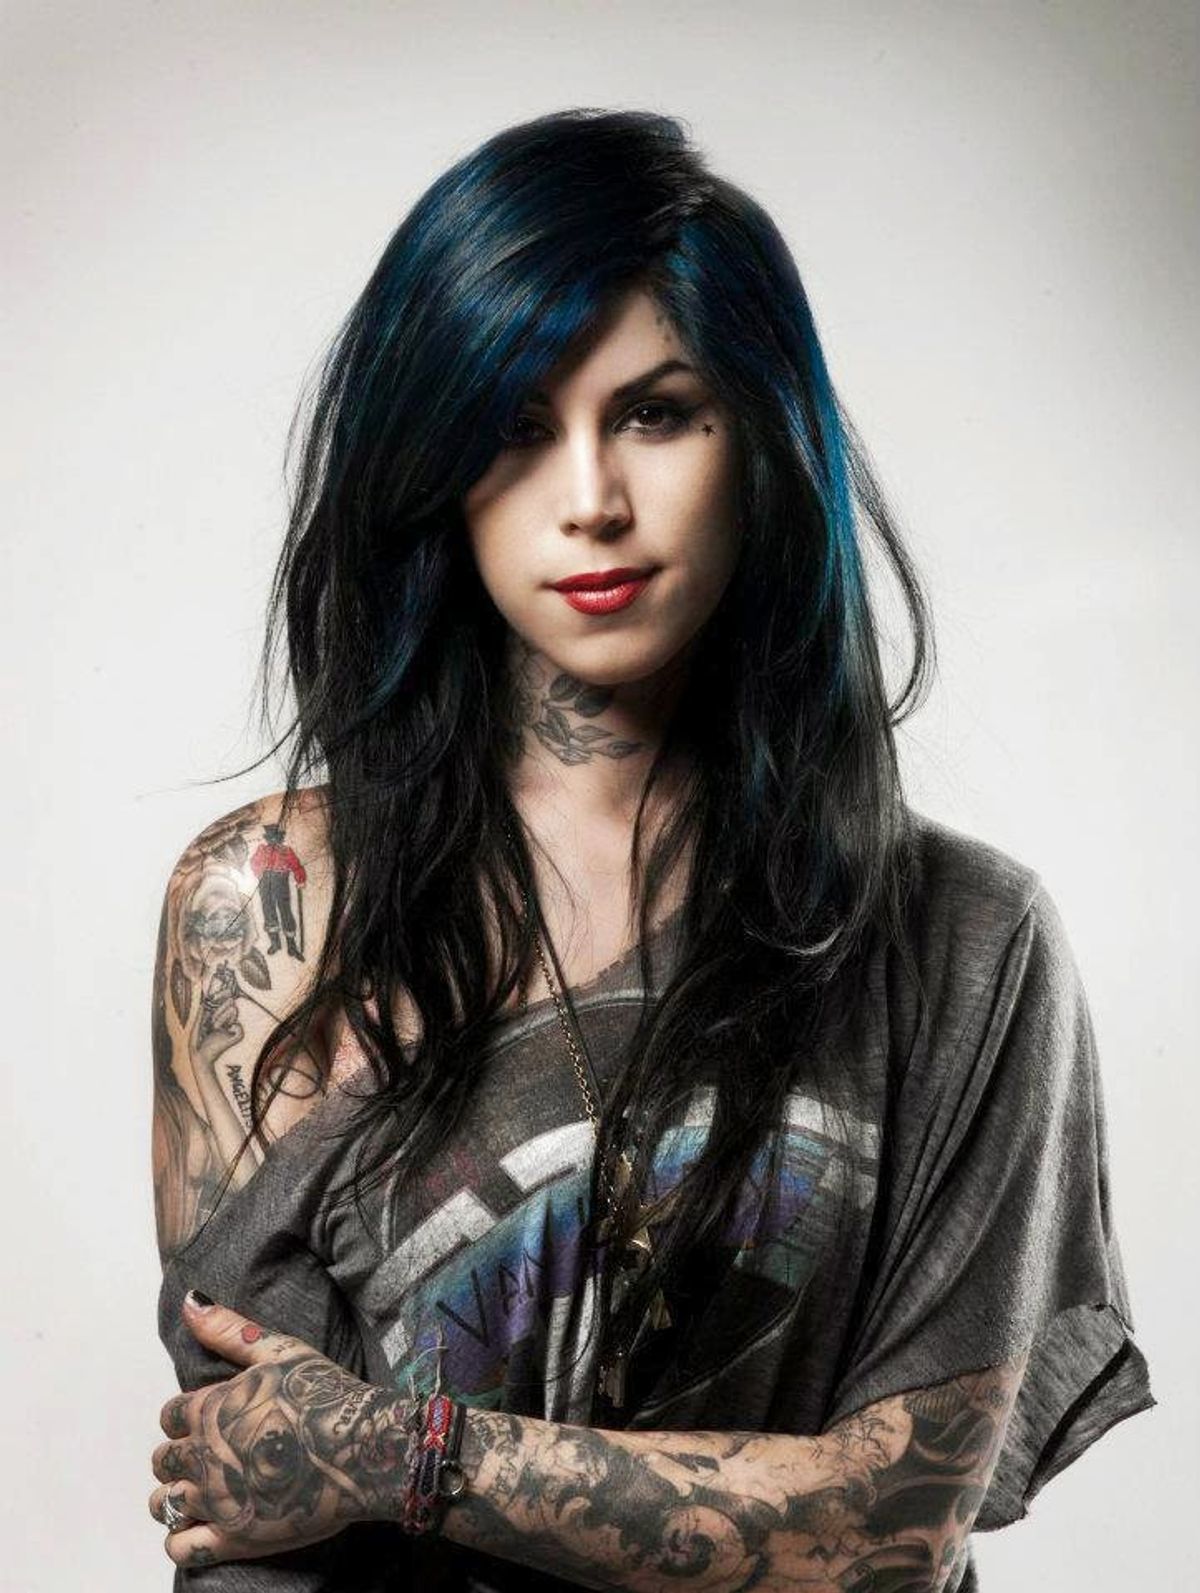 10 Life Lessons You Can Learn From Kat Von D